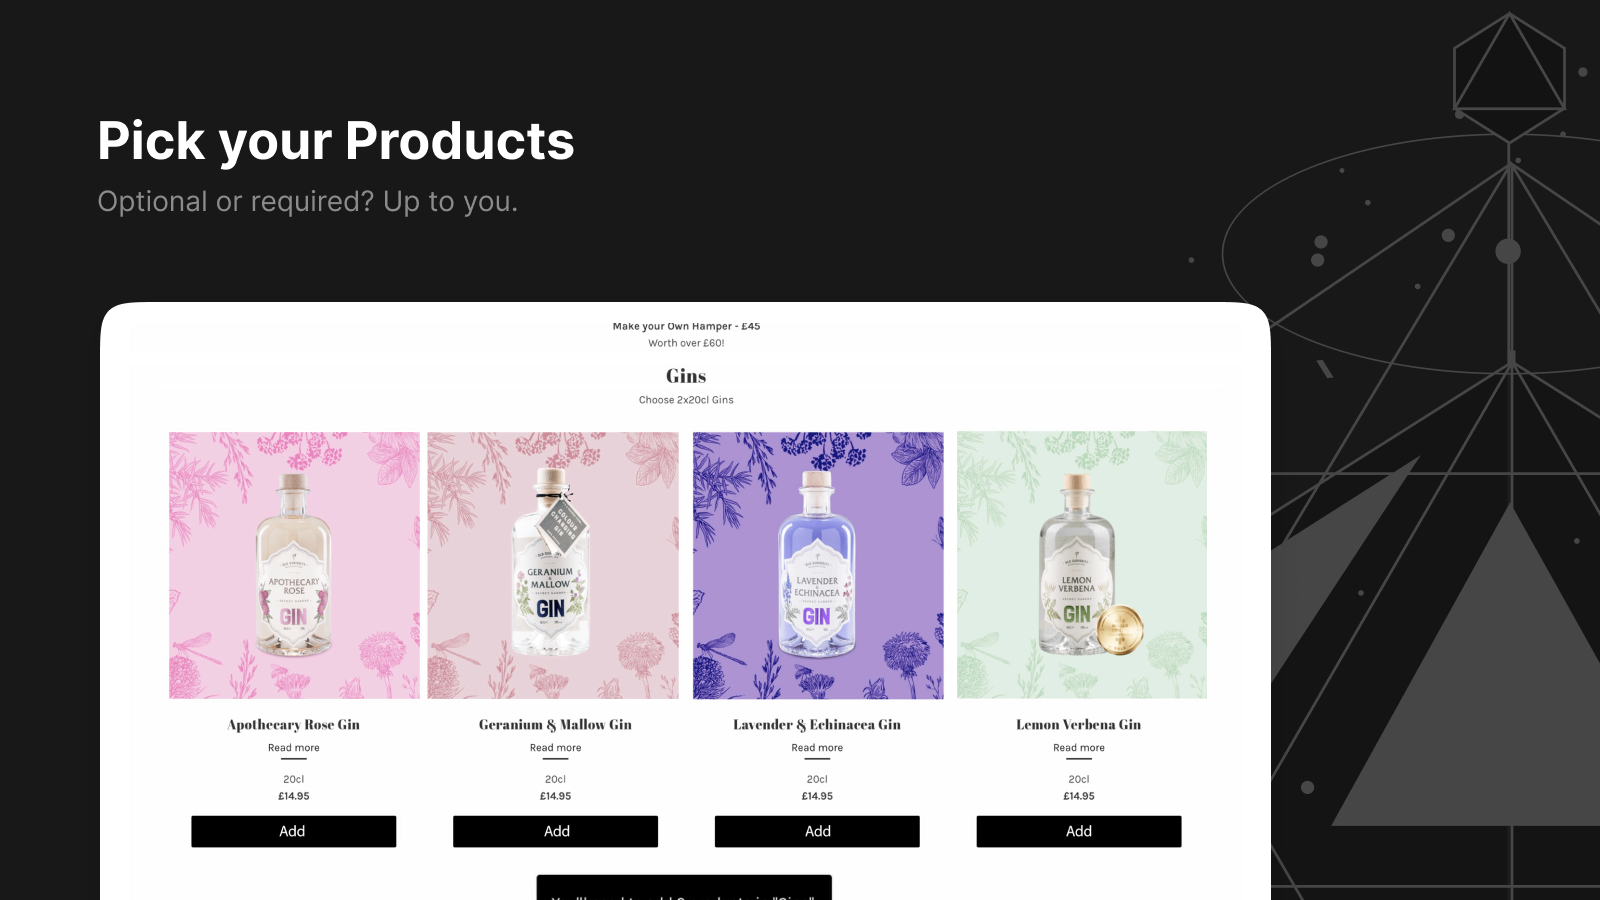 Easily select the products you want to include in your bundle.